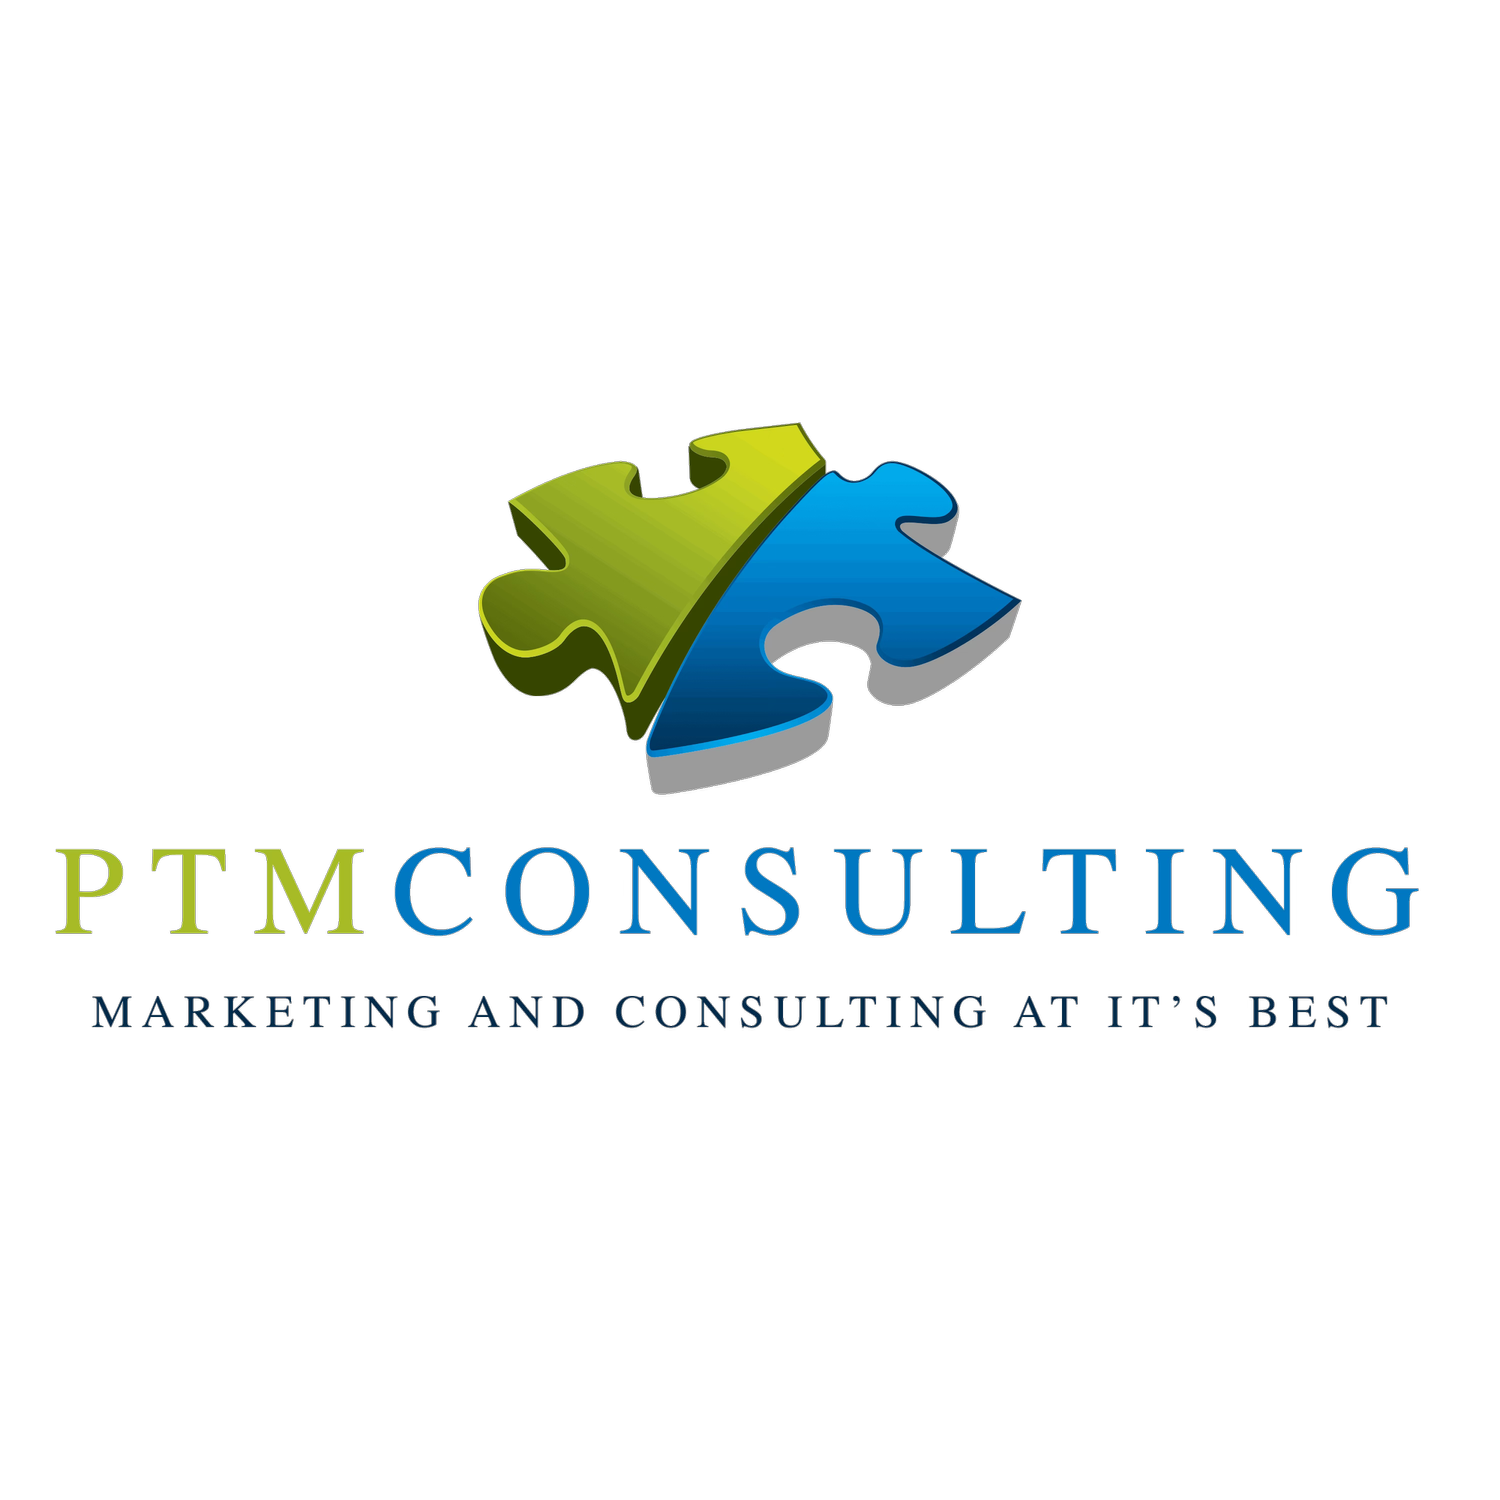 PTM Consulting